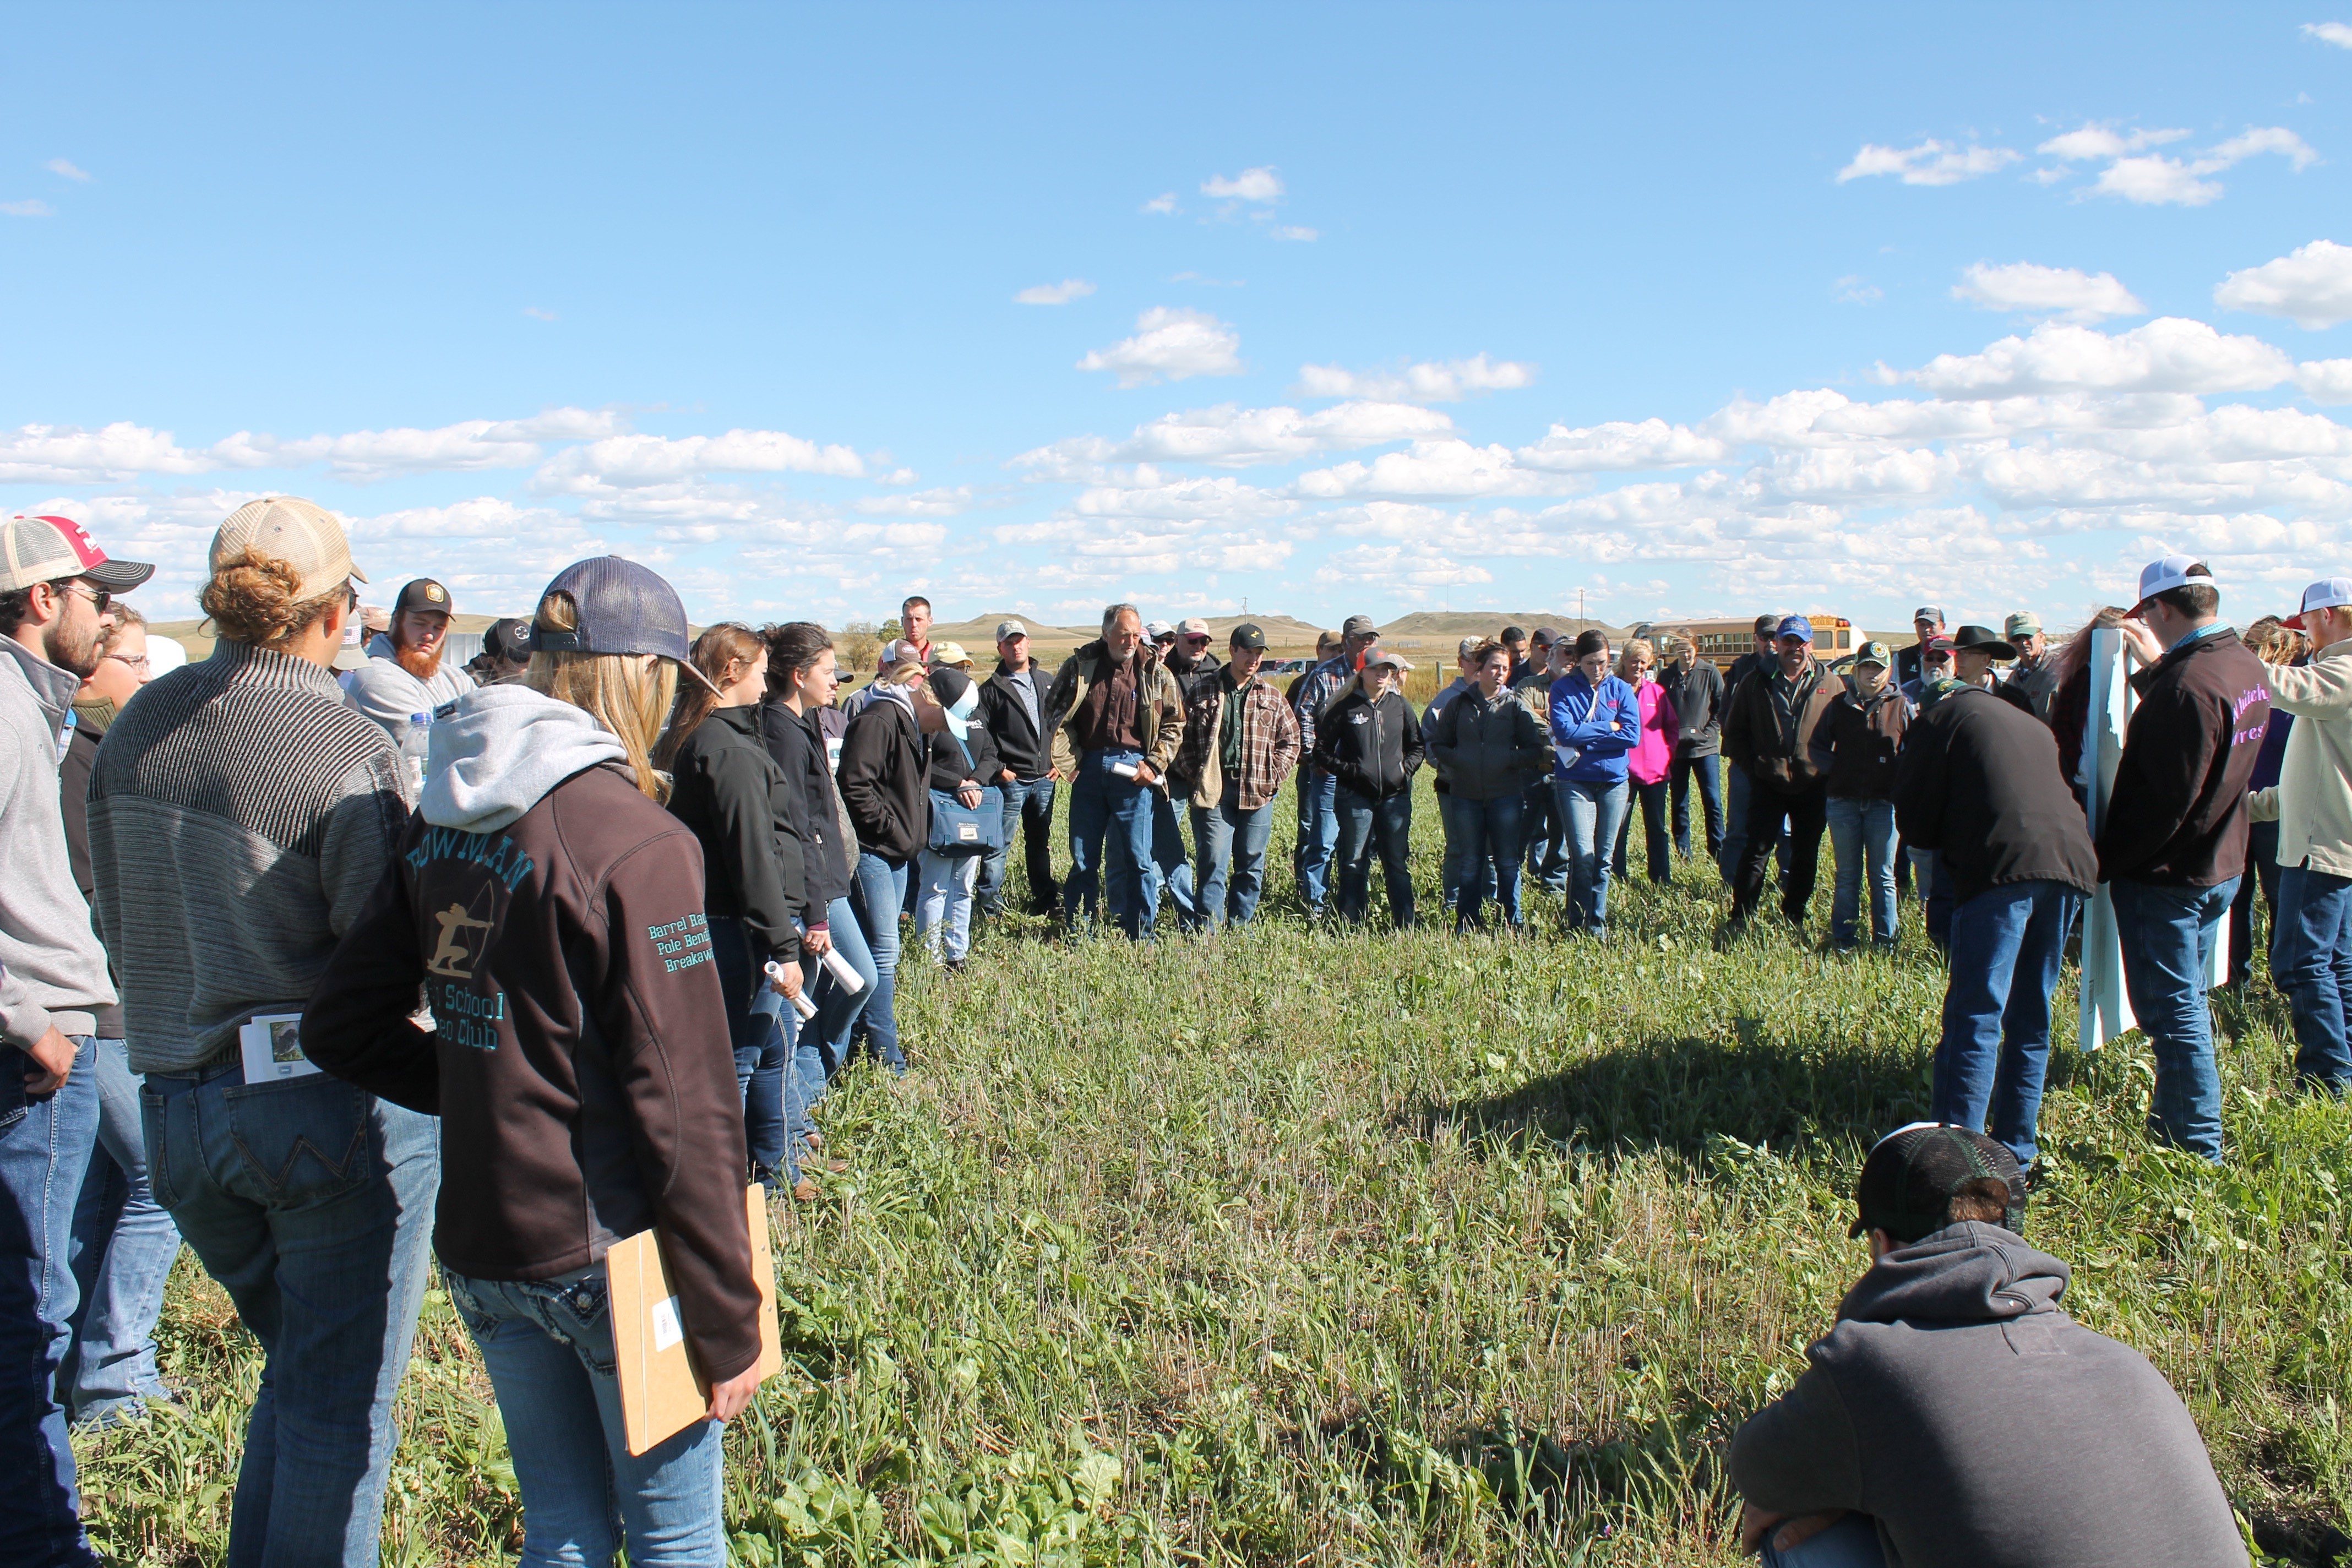 Area producers and students from Dickinson State University attend a past Soil Health Field Day at the Dickinson Research Extension Center. (NDSU photo)